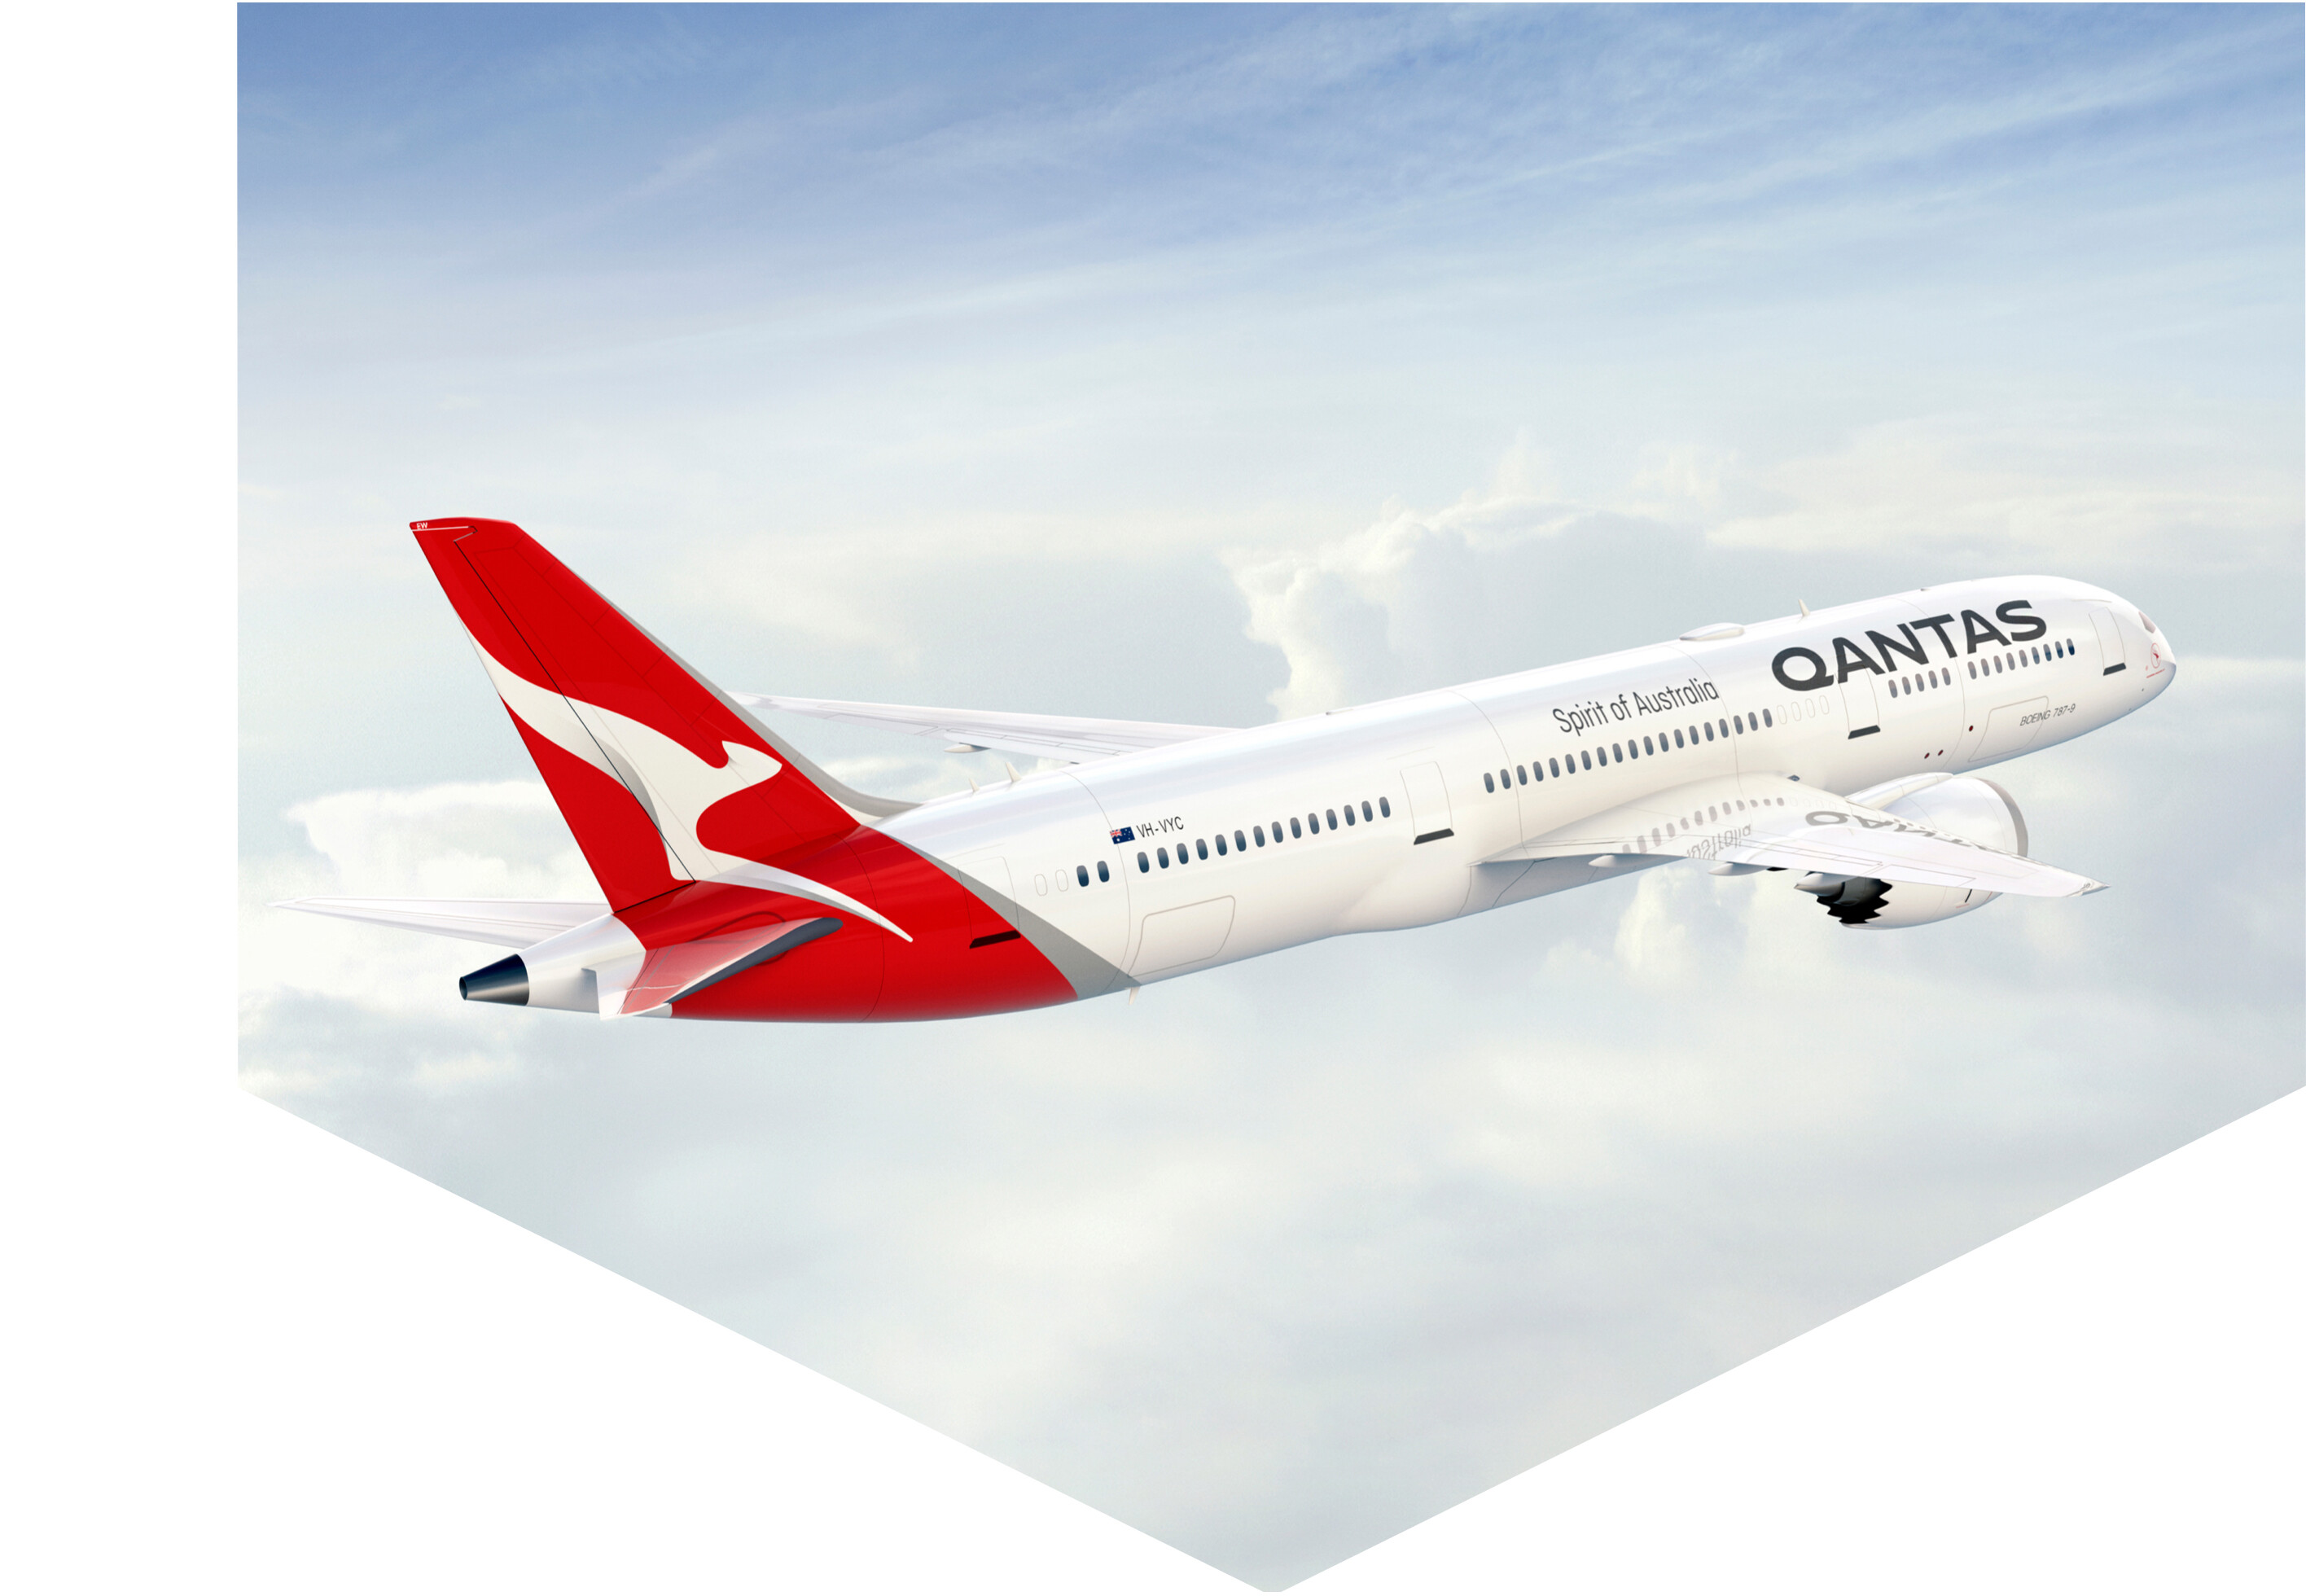 Customer Possibility Story of how Qantas Loyalty Store improved their customer loyalty experience by going with commercetools' microservices-based approach